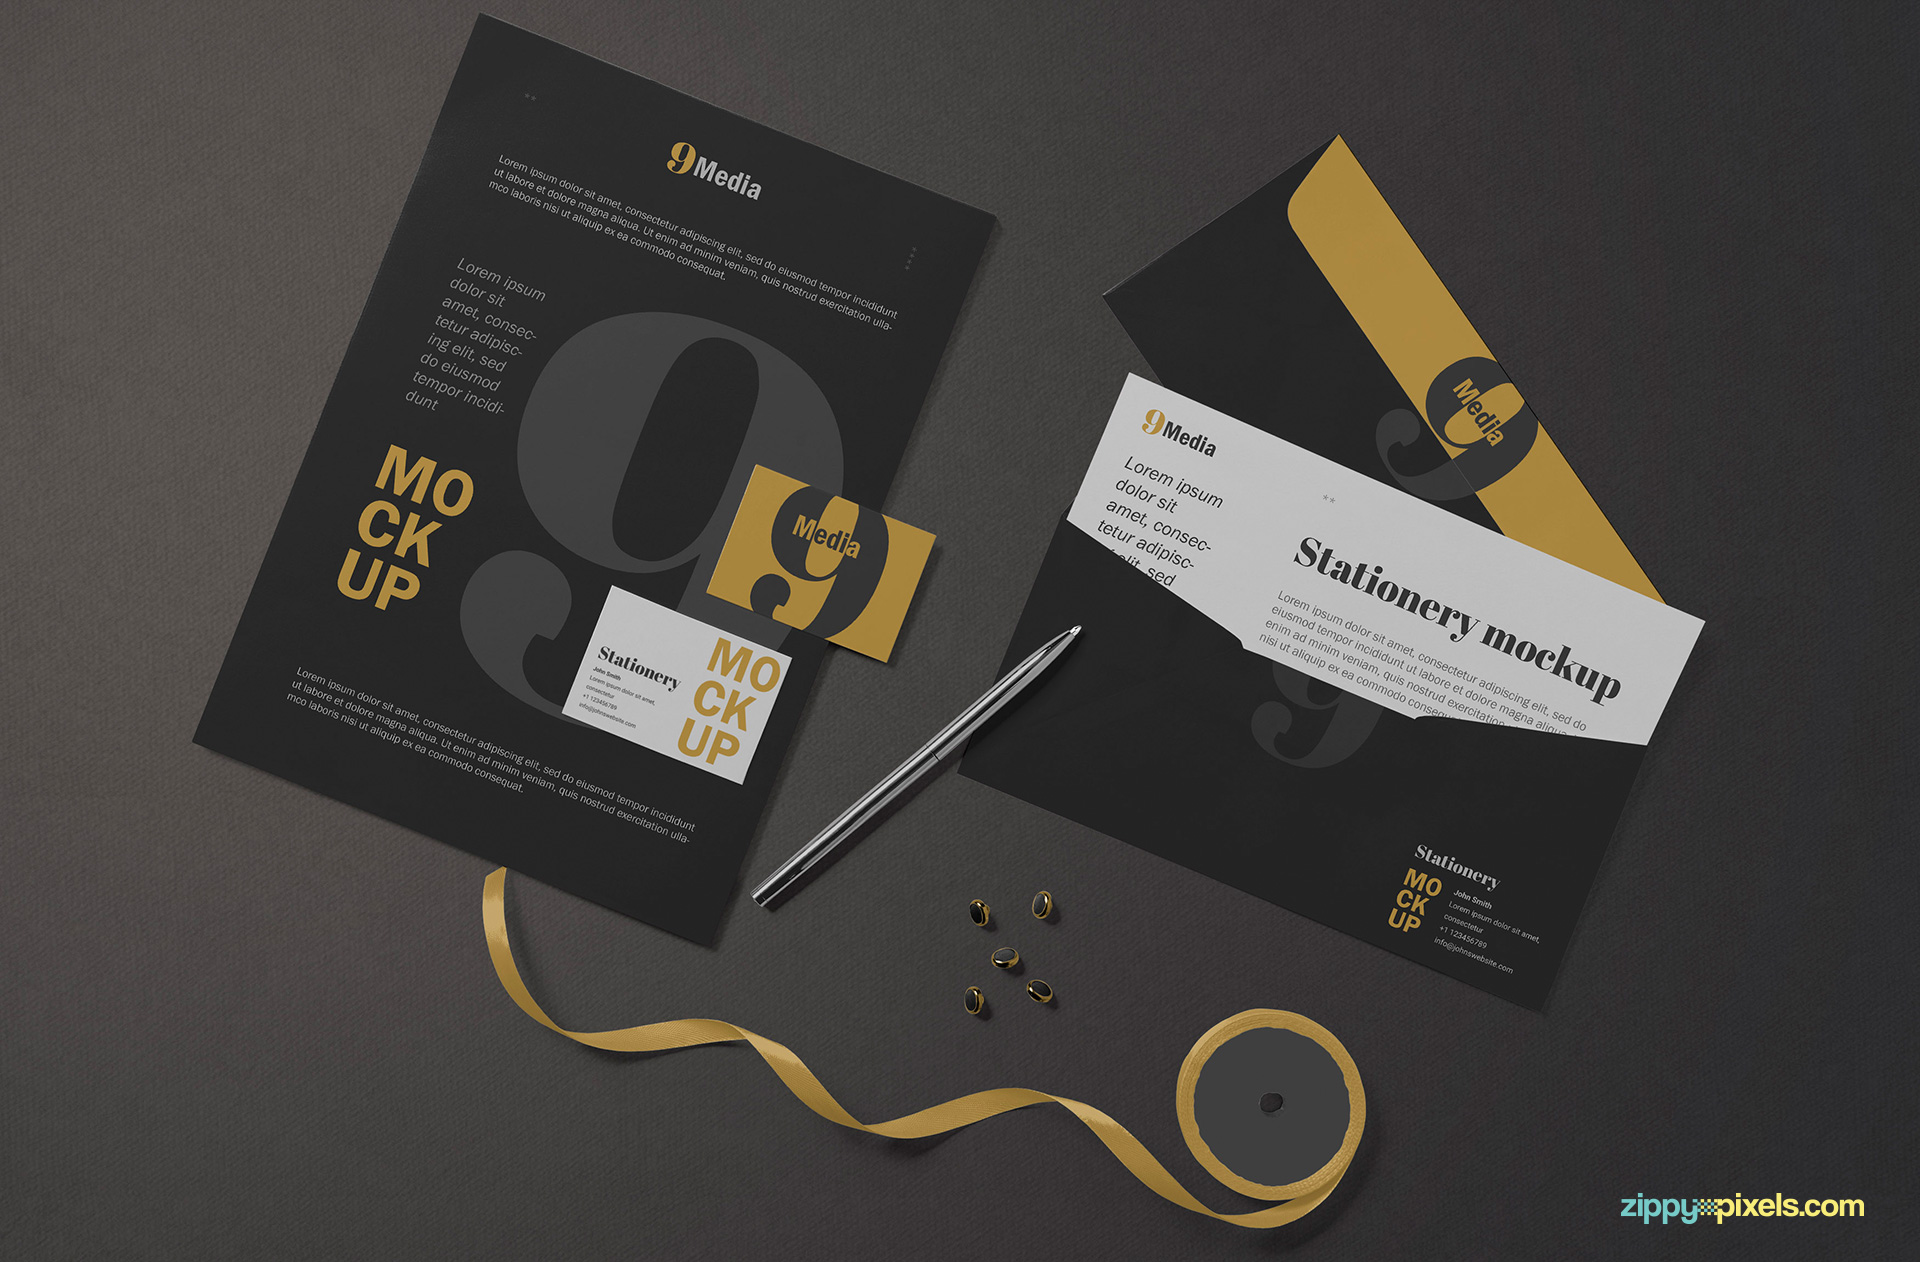 A free letterhead and business card mockup